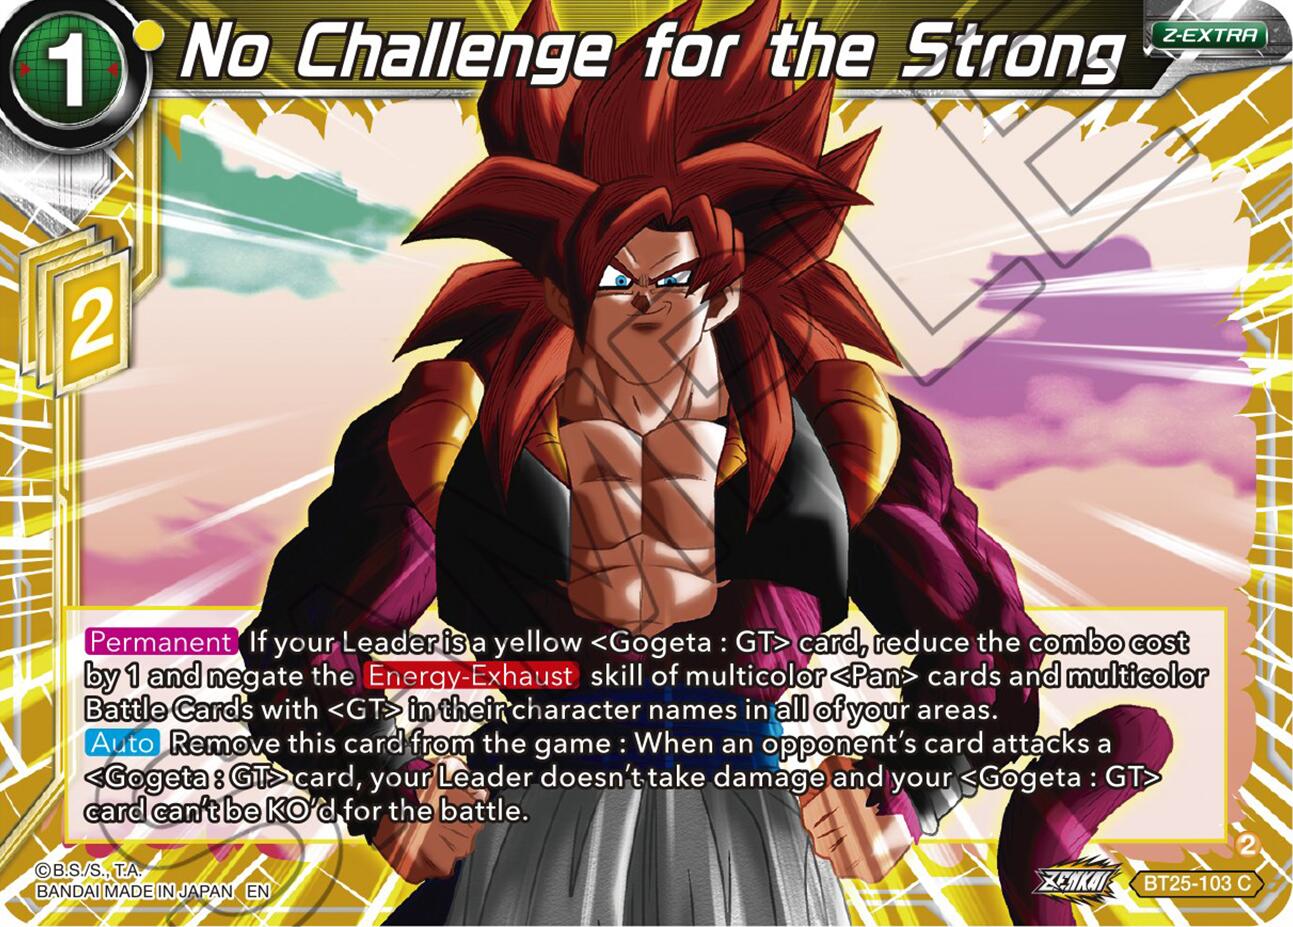 No Challenge for the Strong (BT25-103 C) [Legend of the Dragon Balls] | Gauntlet Hobbies - Angola